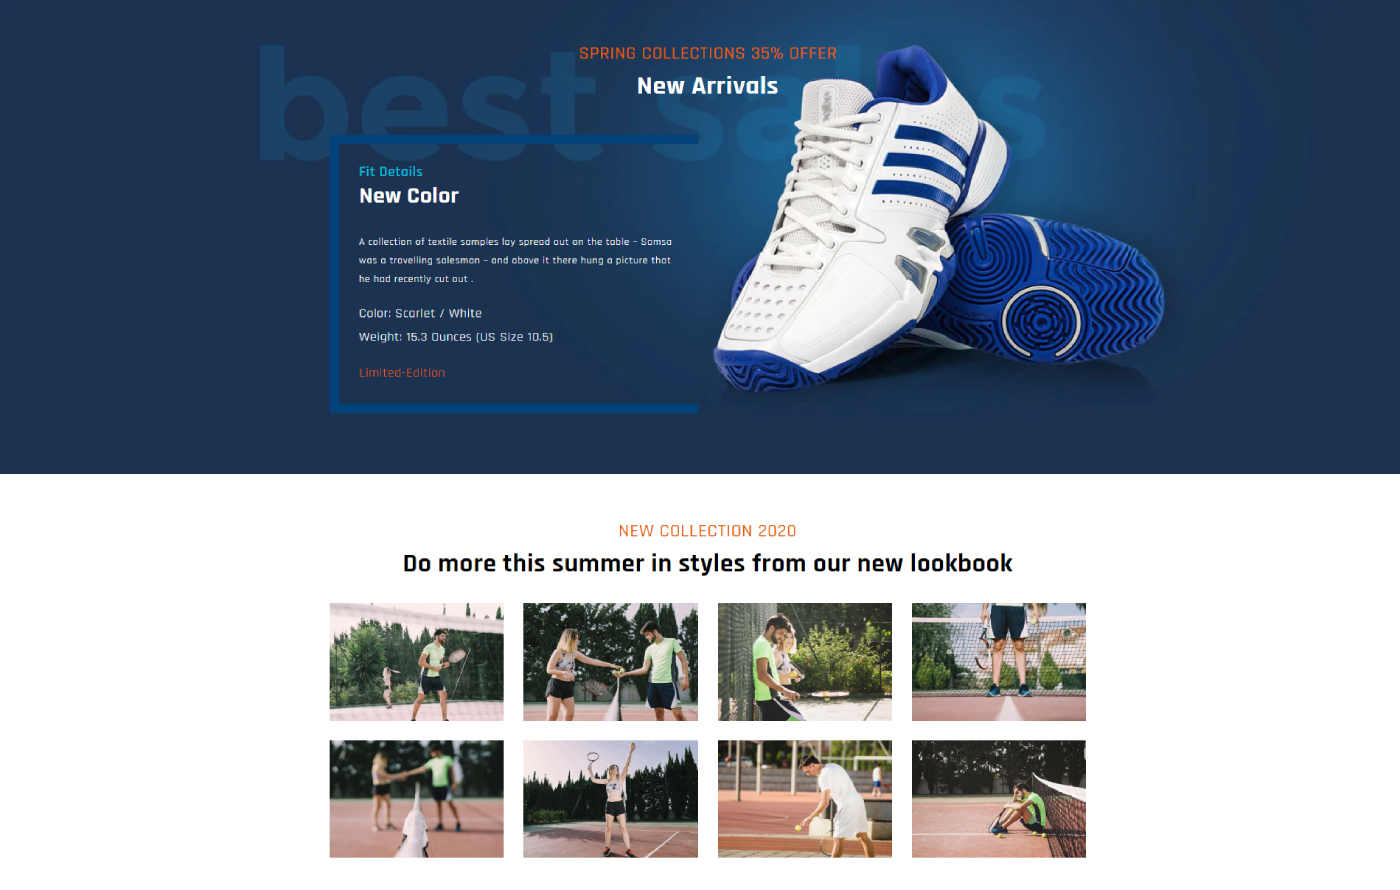 Tennisify - Tennis Accessories Store Shopify template built by Pagefly